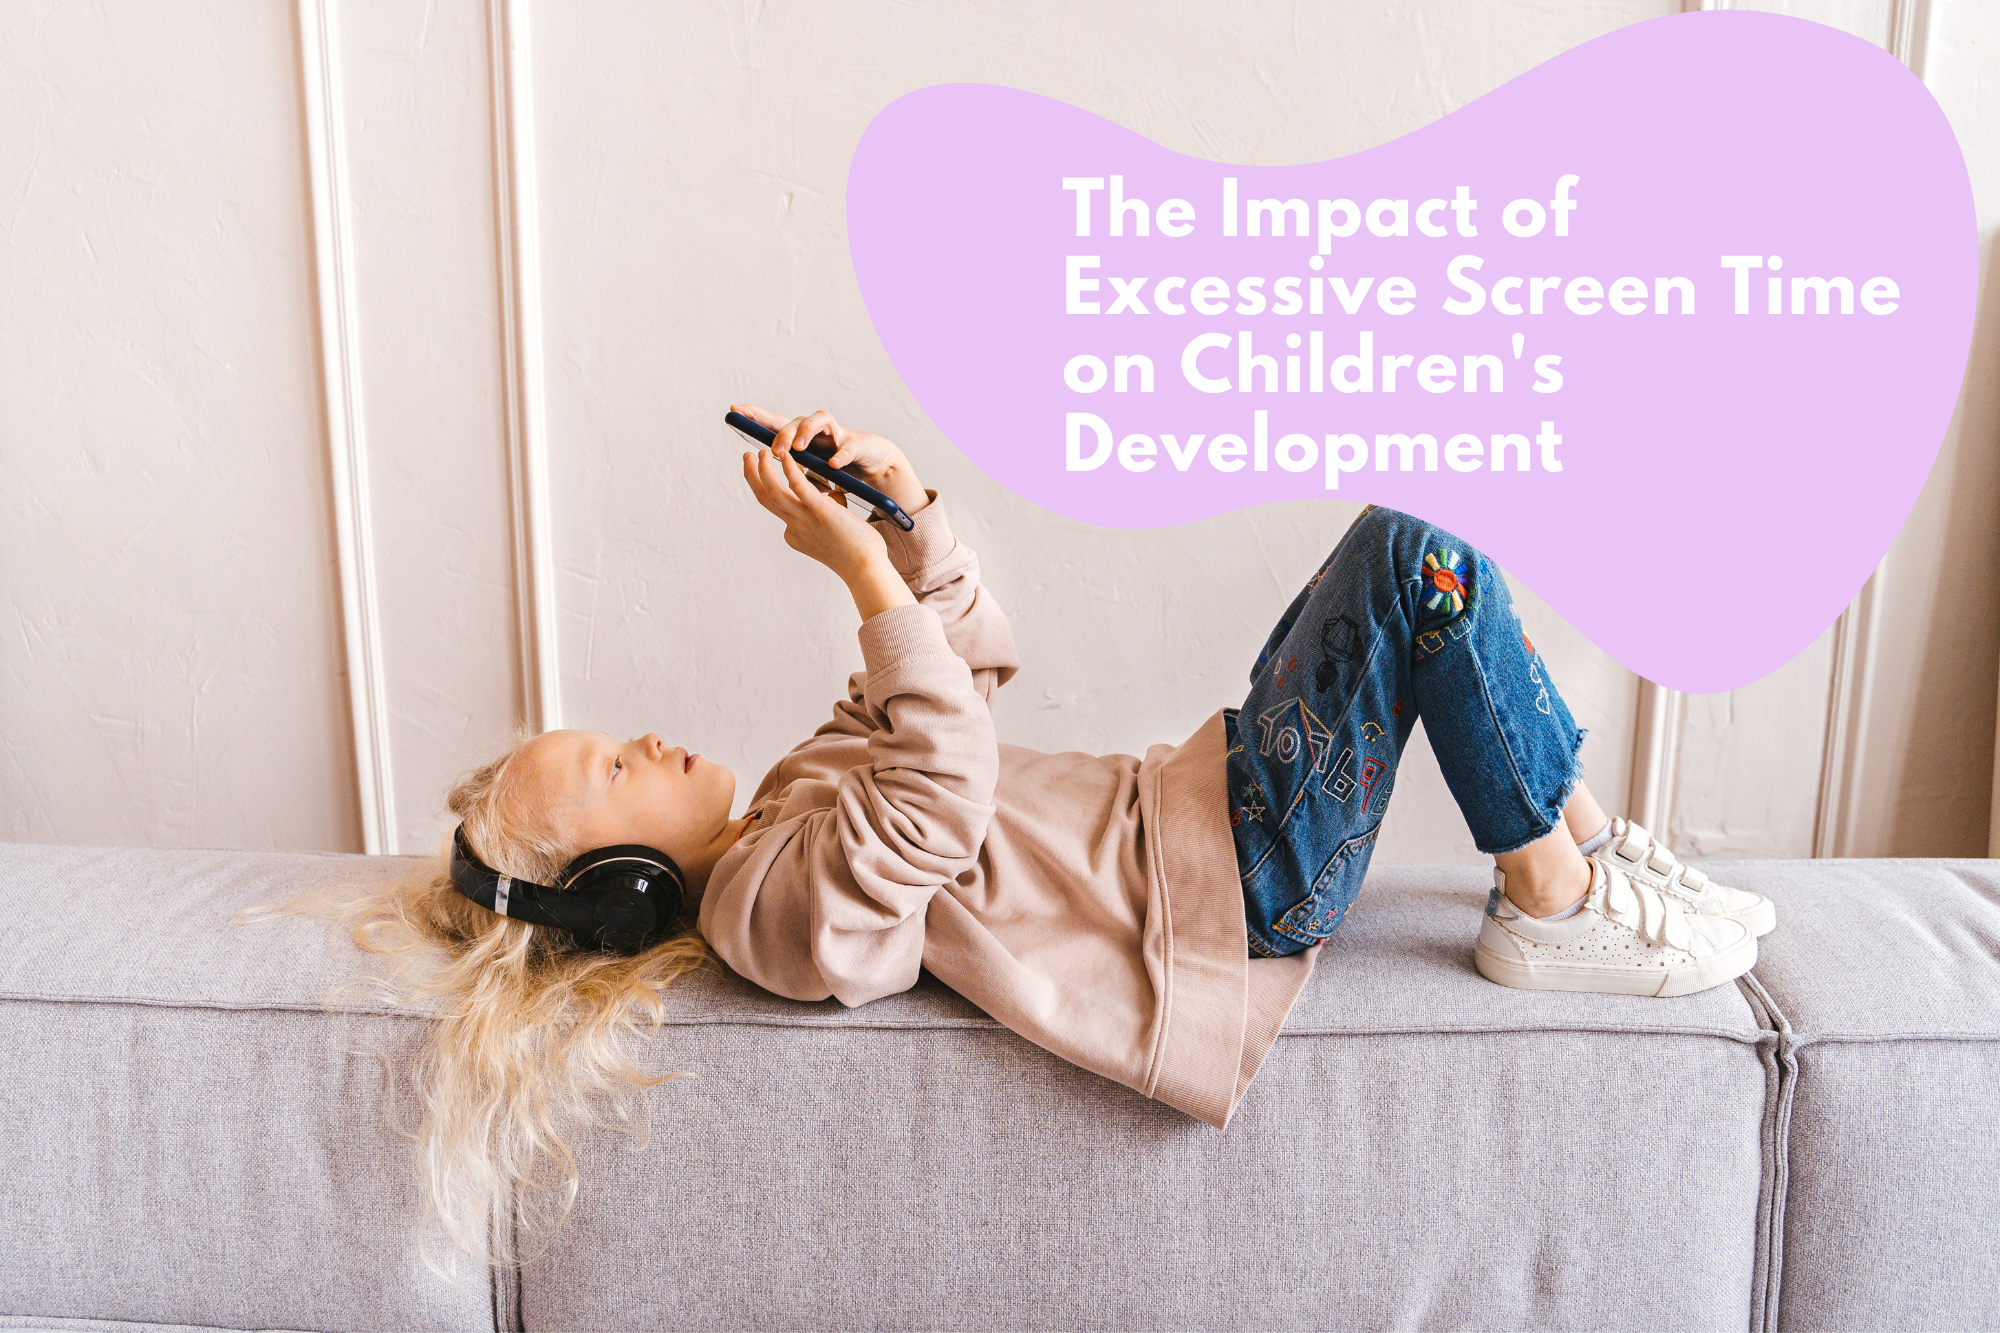 The Impact of Excessive Screen Time on Children's Development